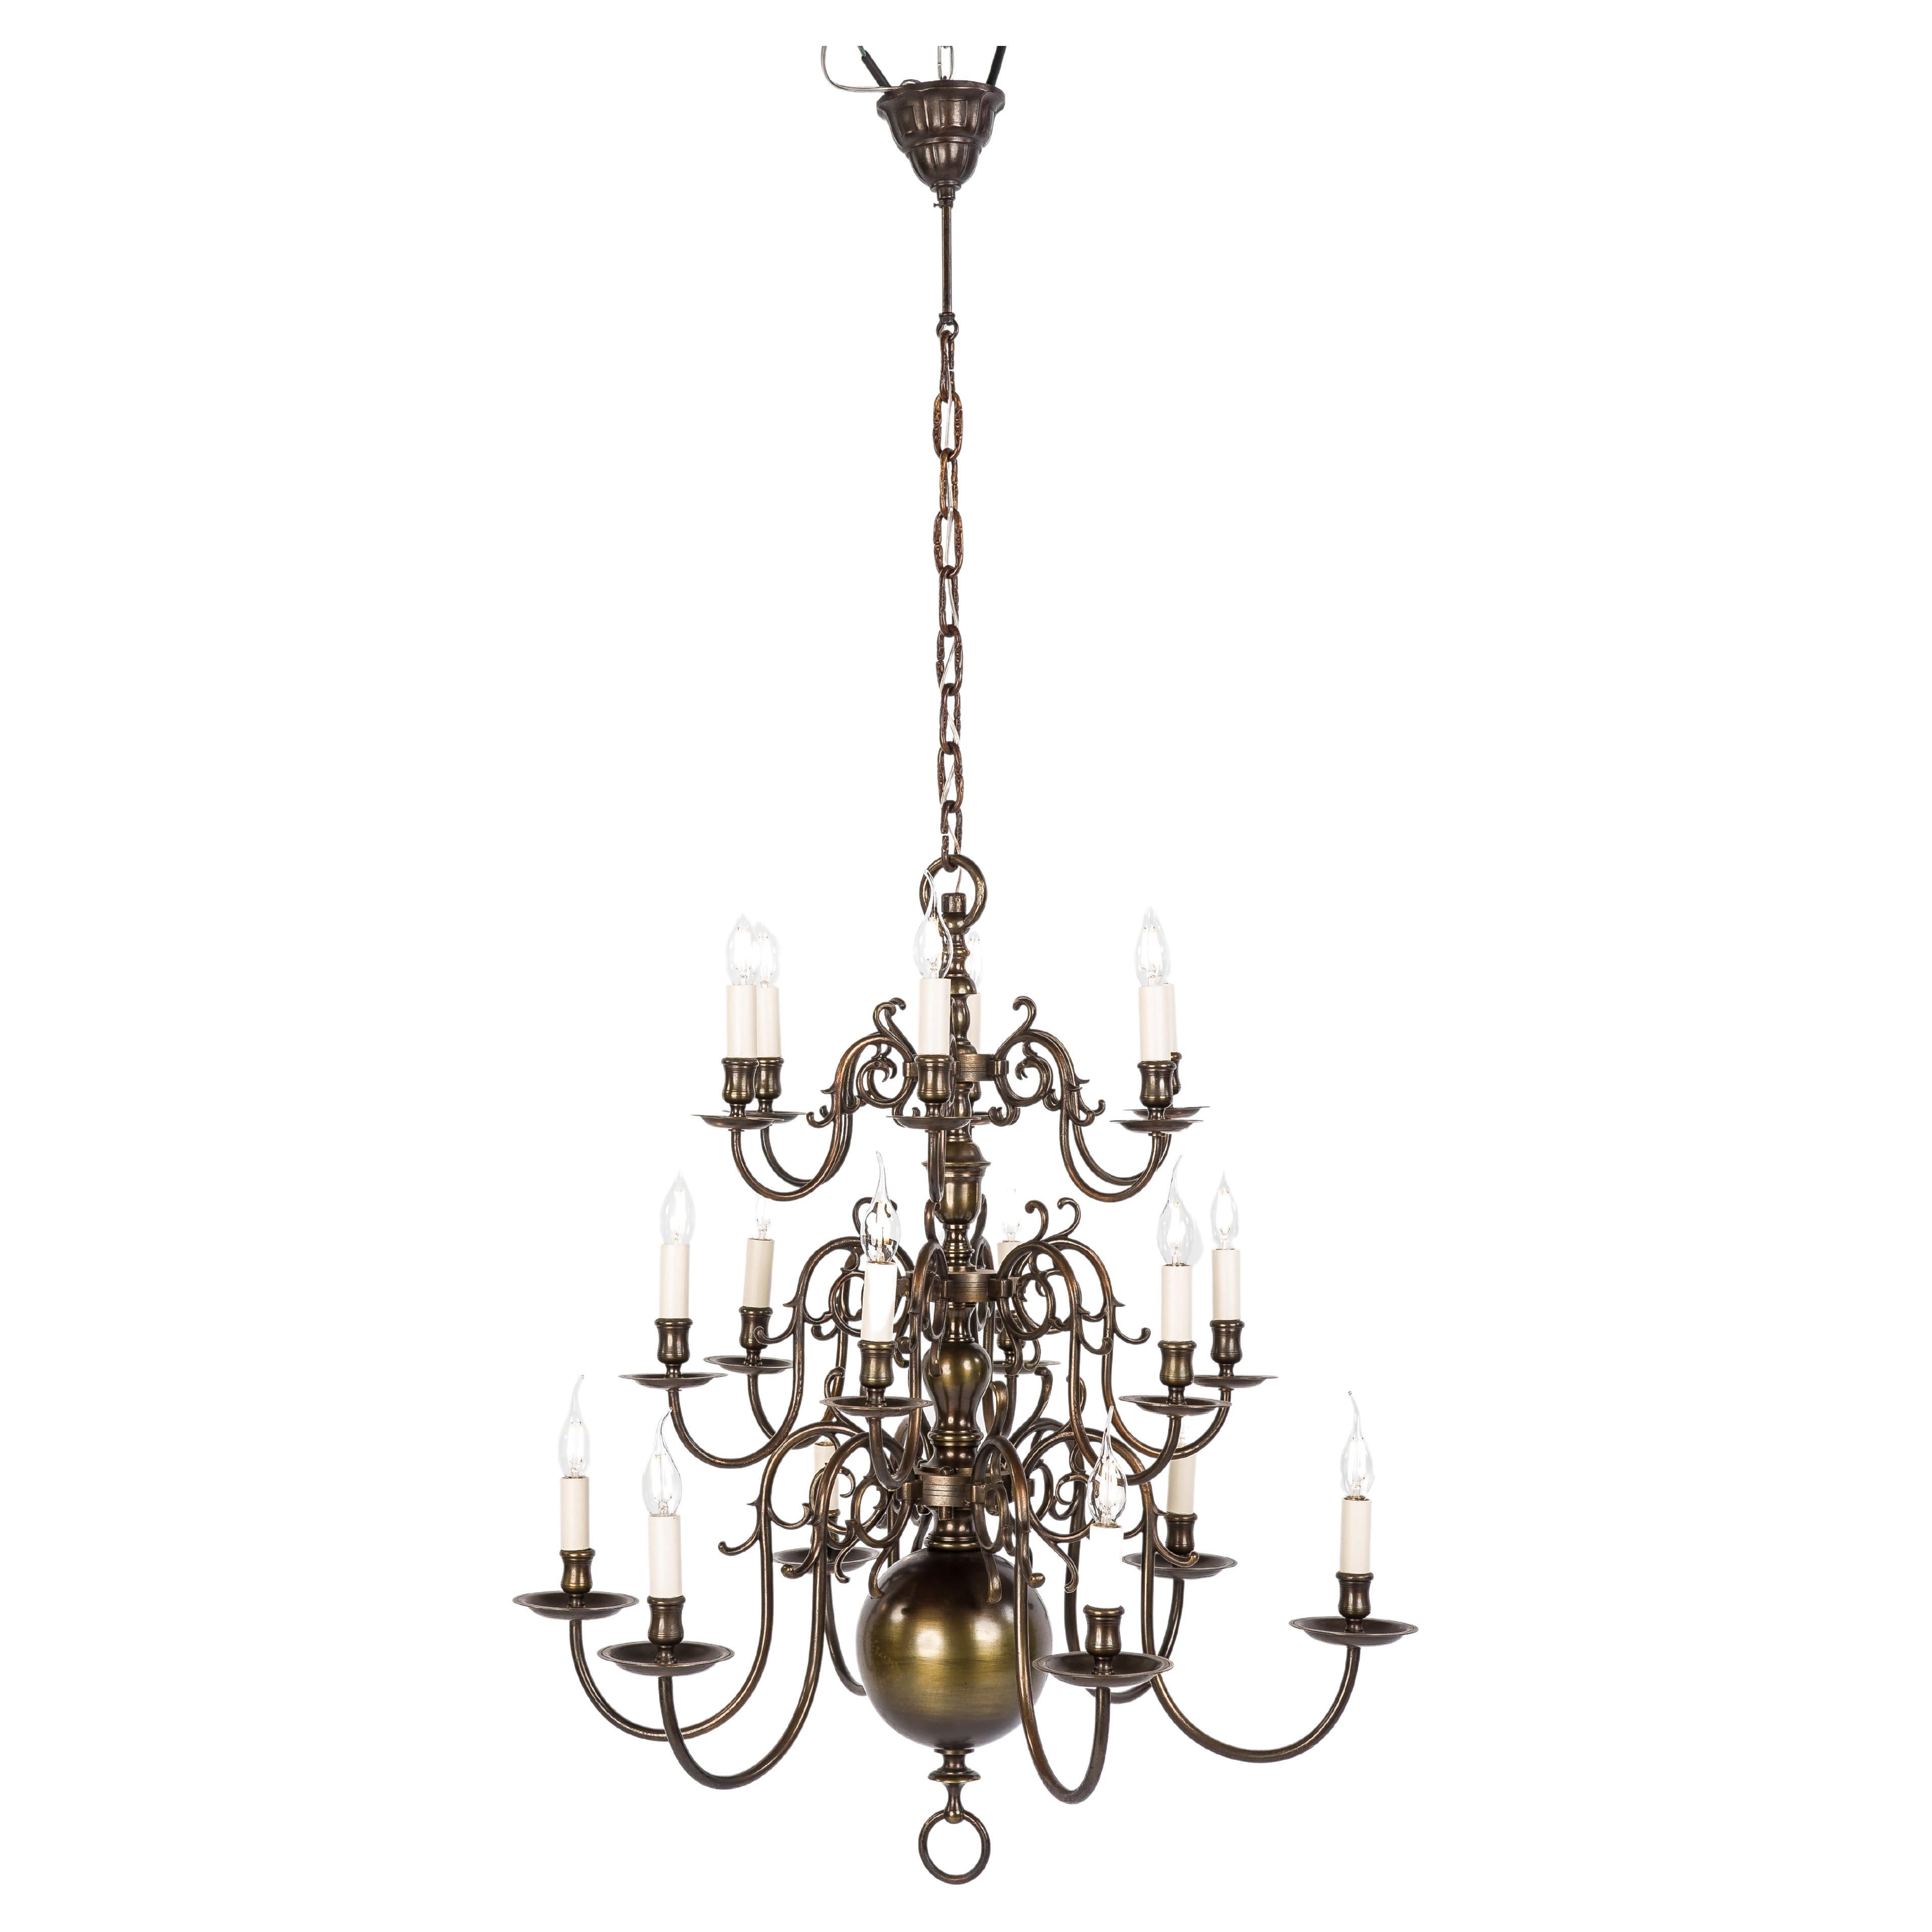 Antique Tall 3-Tier Patinated Brass Dutch Chandelier with 18 Lights For Sale